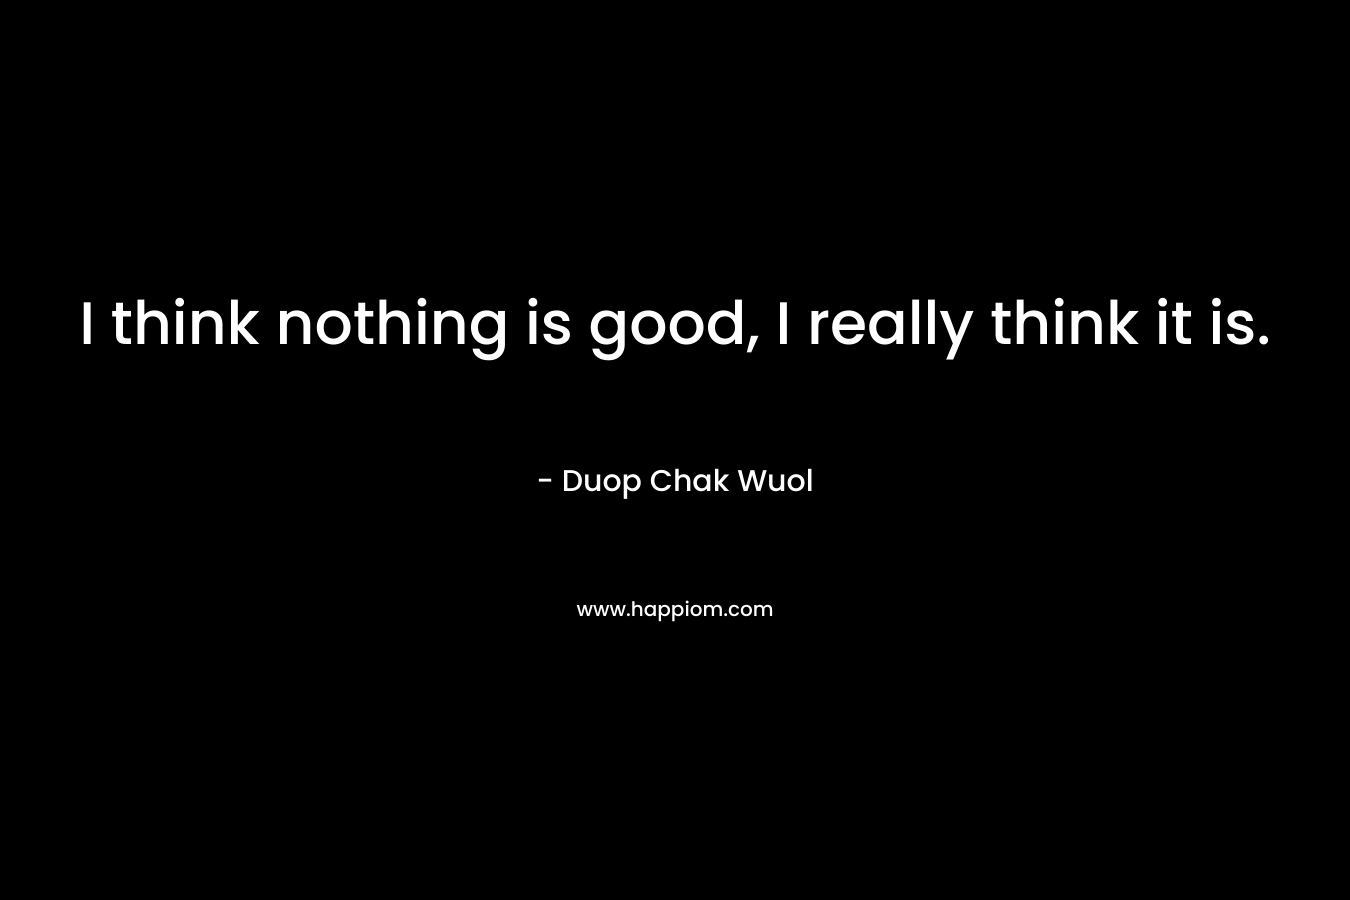 I think nothing is good, I really think it is. – Duop Chak Wuol